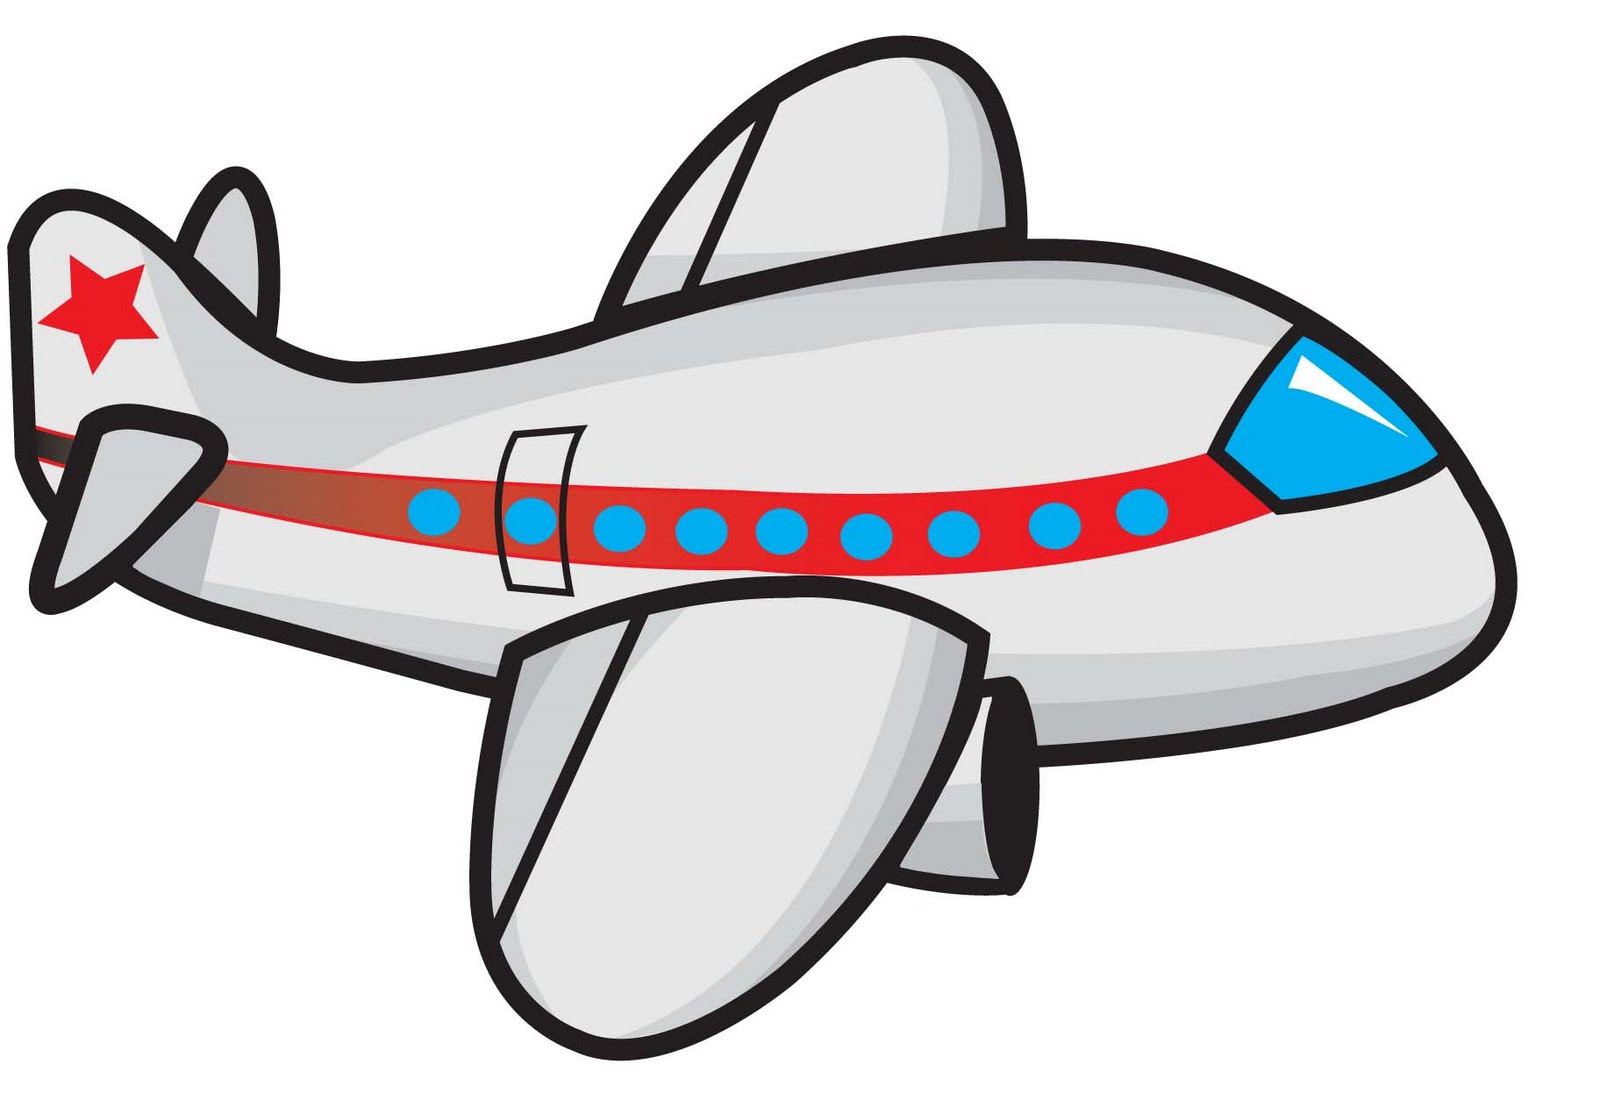 1000+ images about Cartoon Airplanes